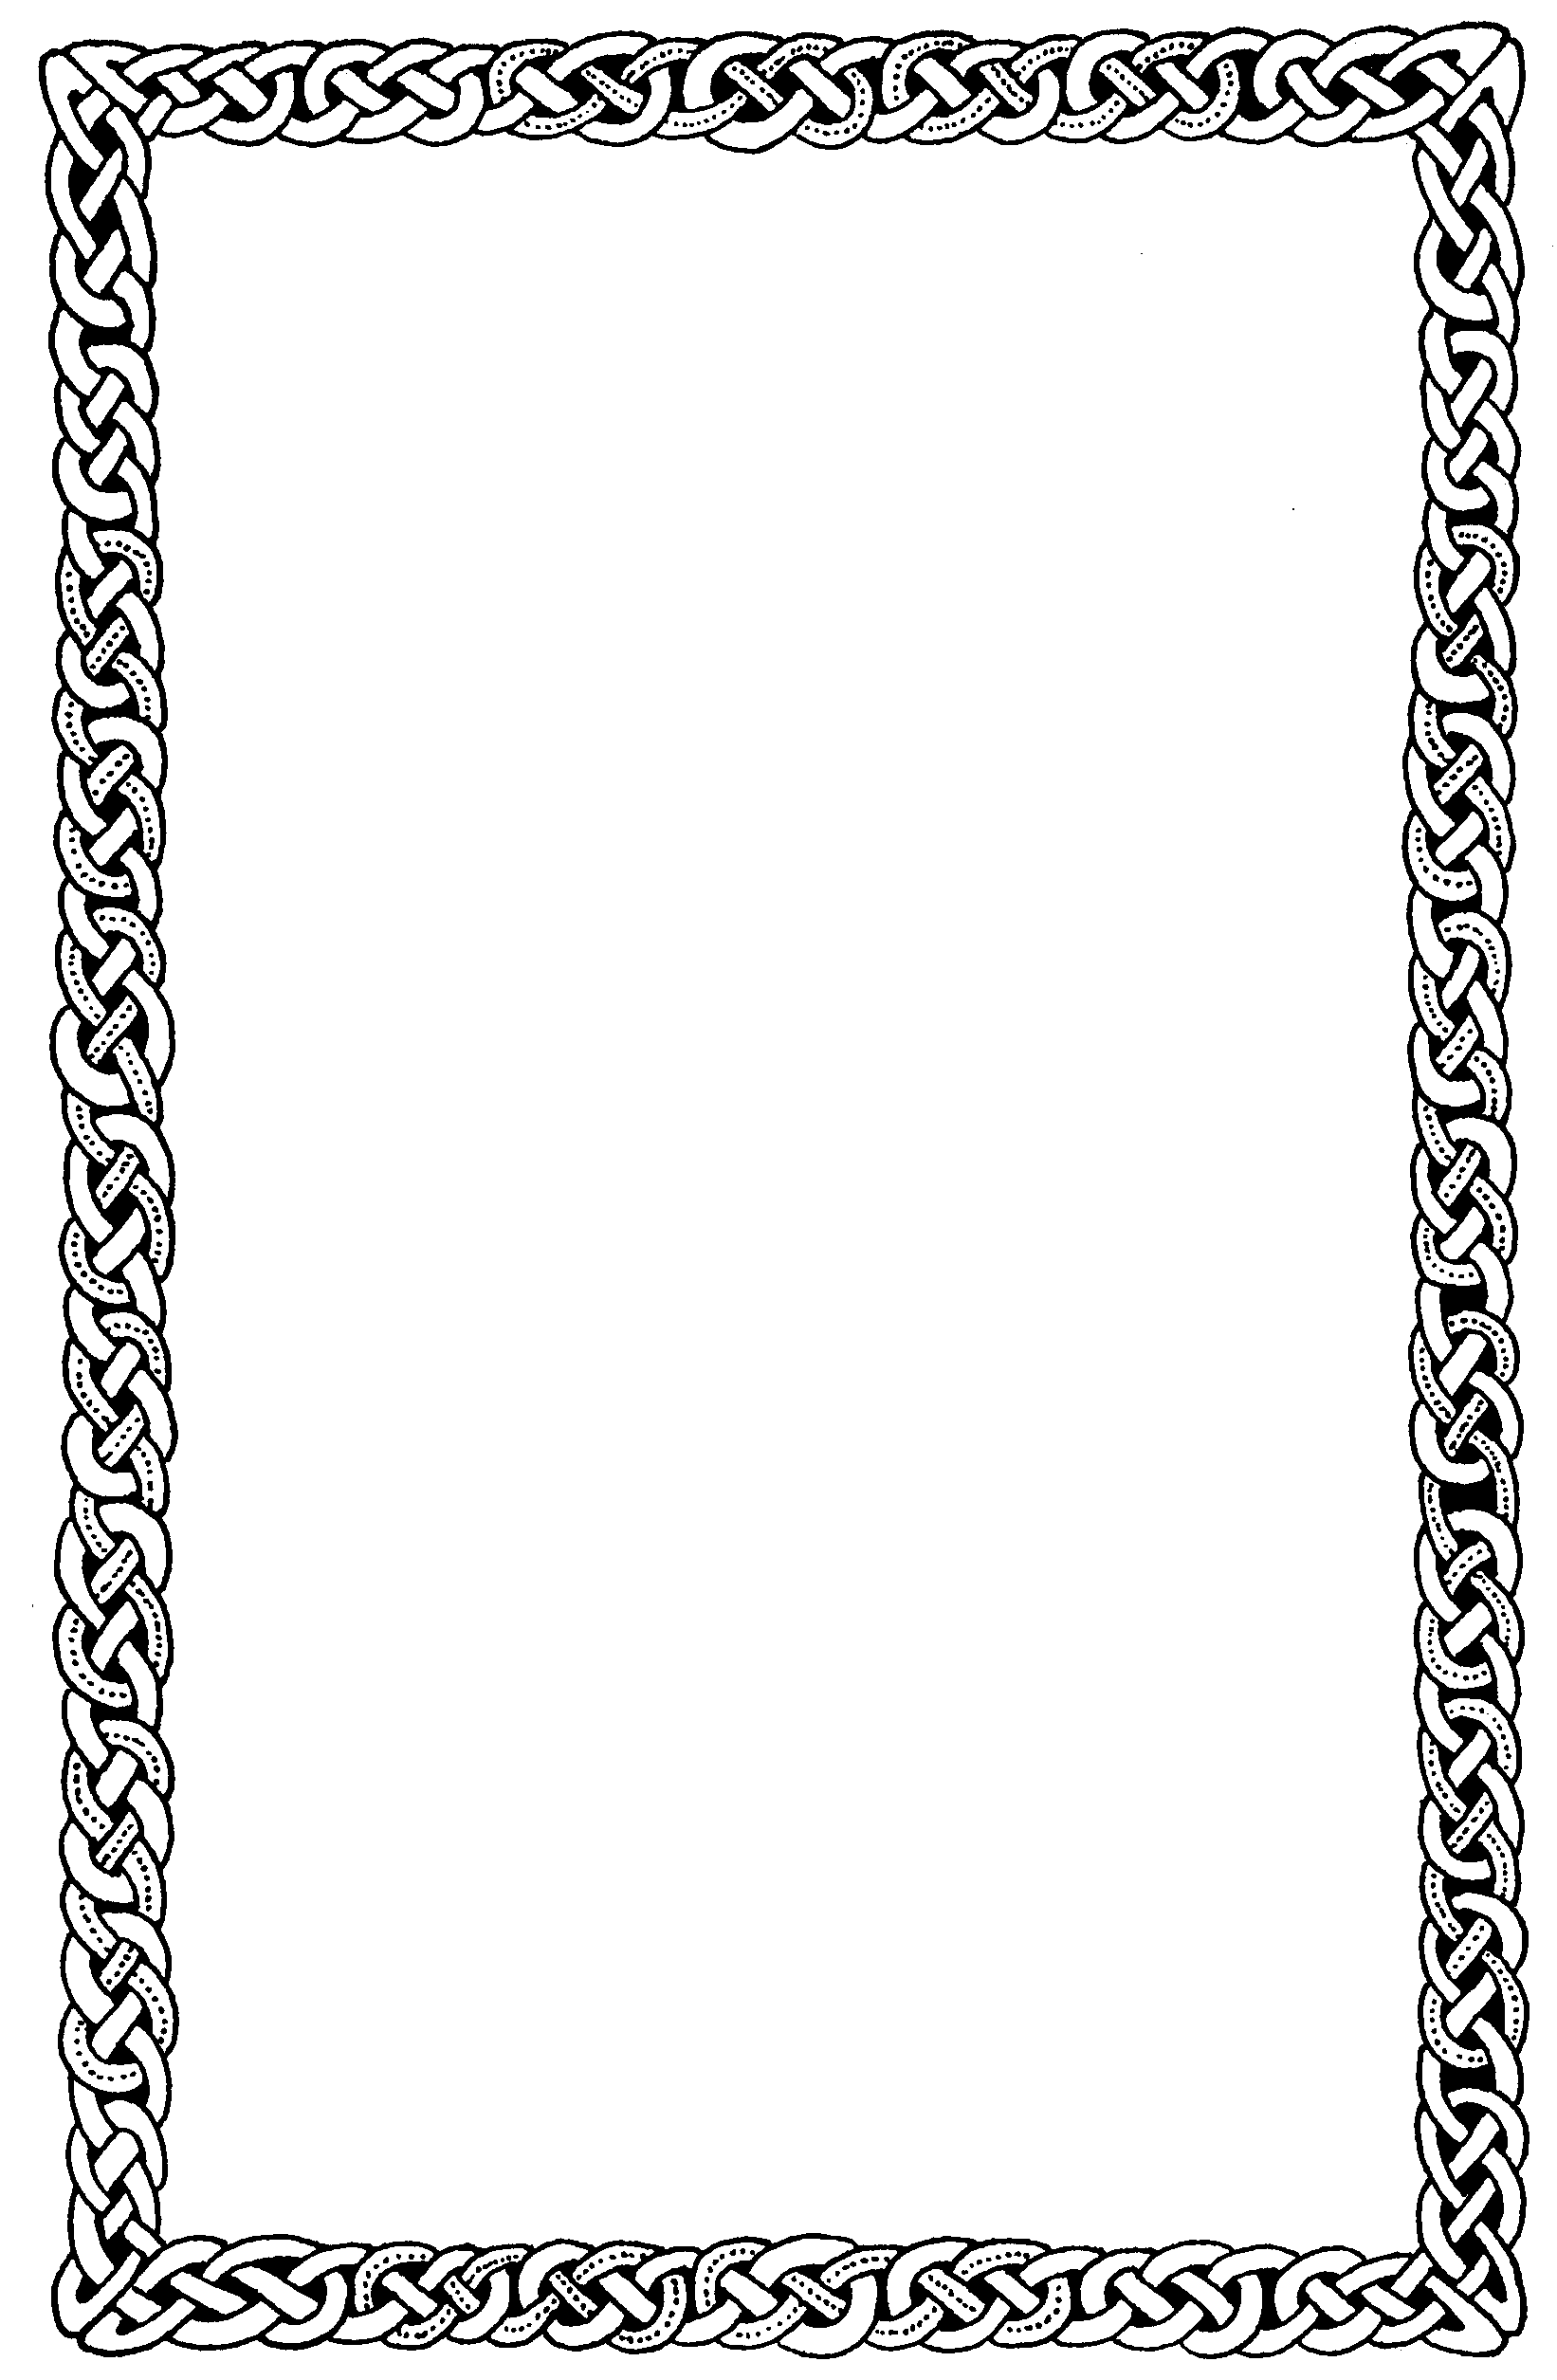 Celtic Page Border - Clipart library